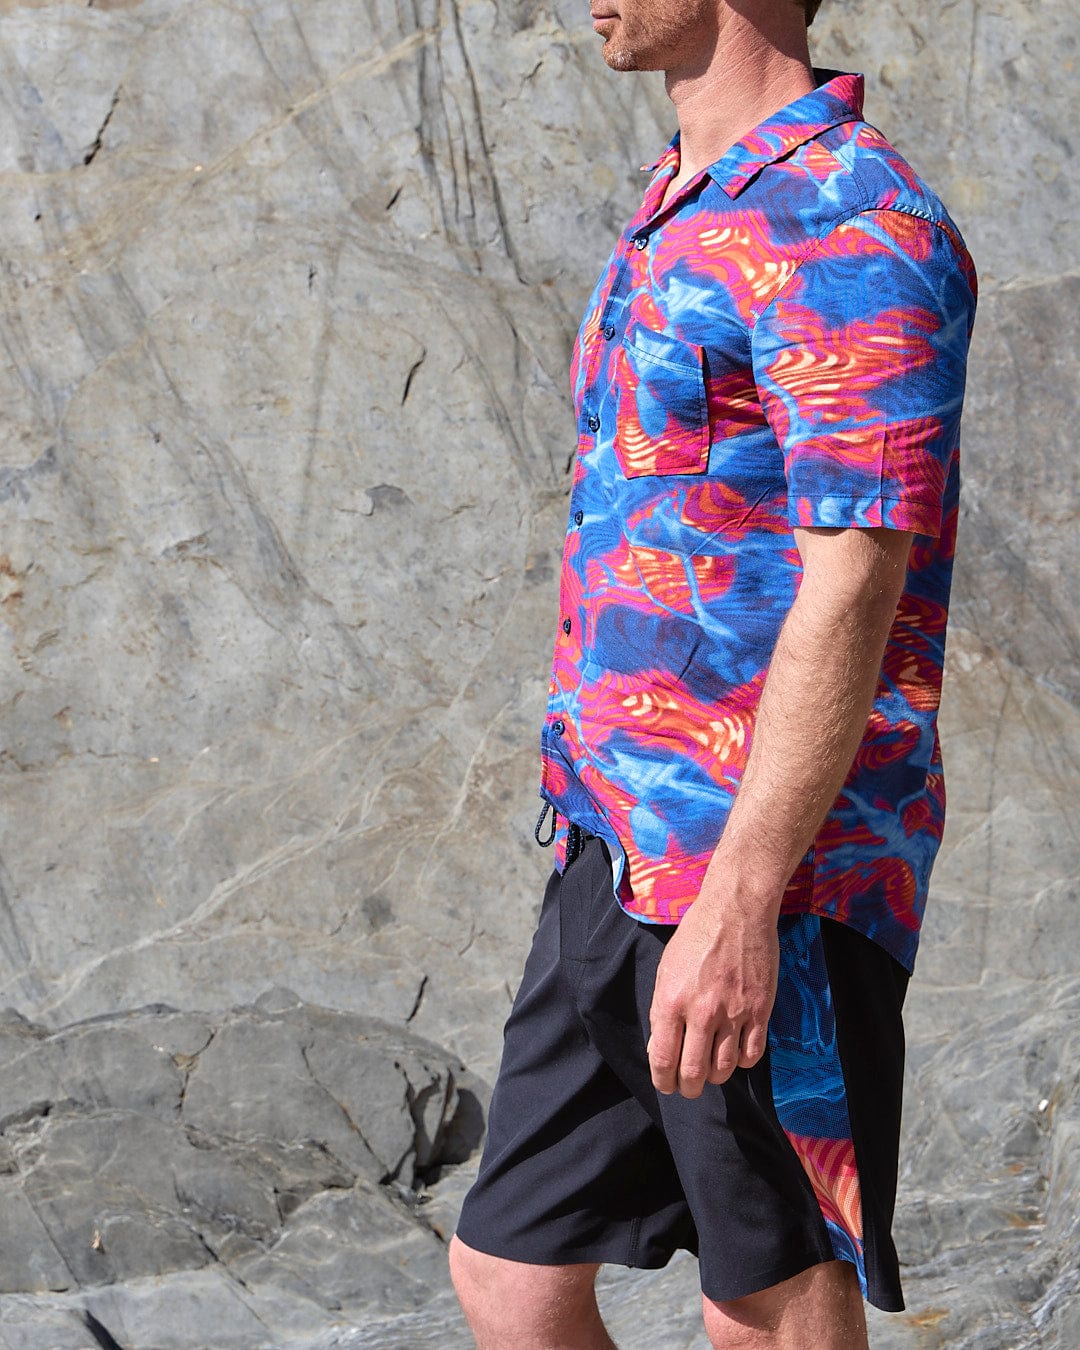 A man in a Saltrock Poolside Panel - Mens Recycled 4-Way Stretch Boardshort - Black shirt.